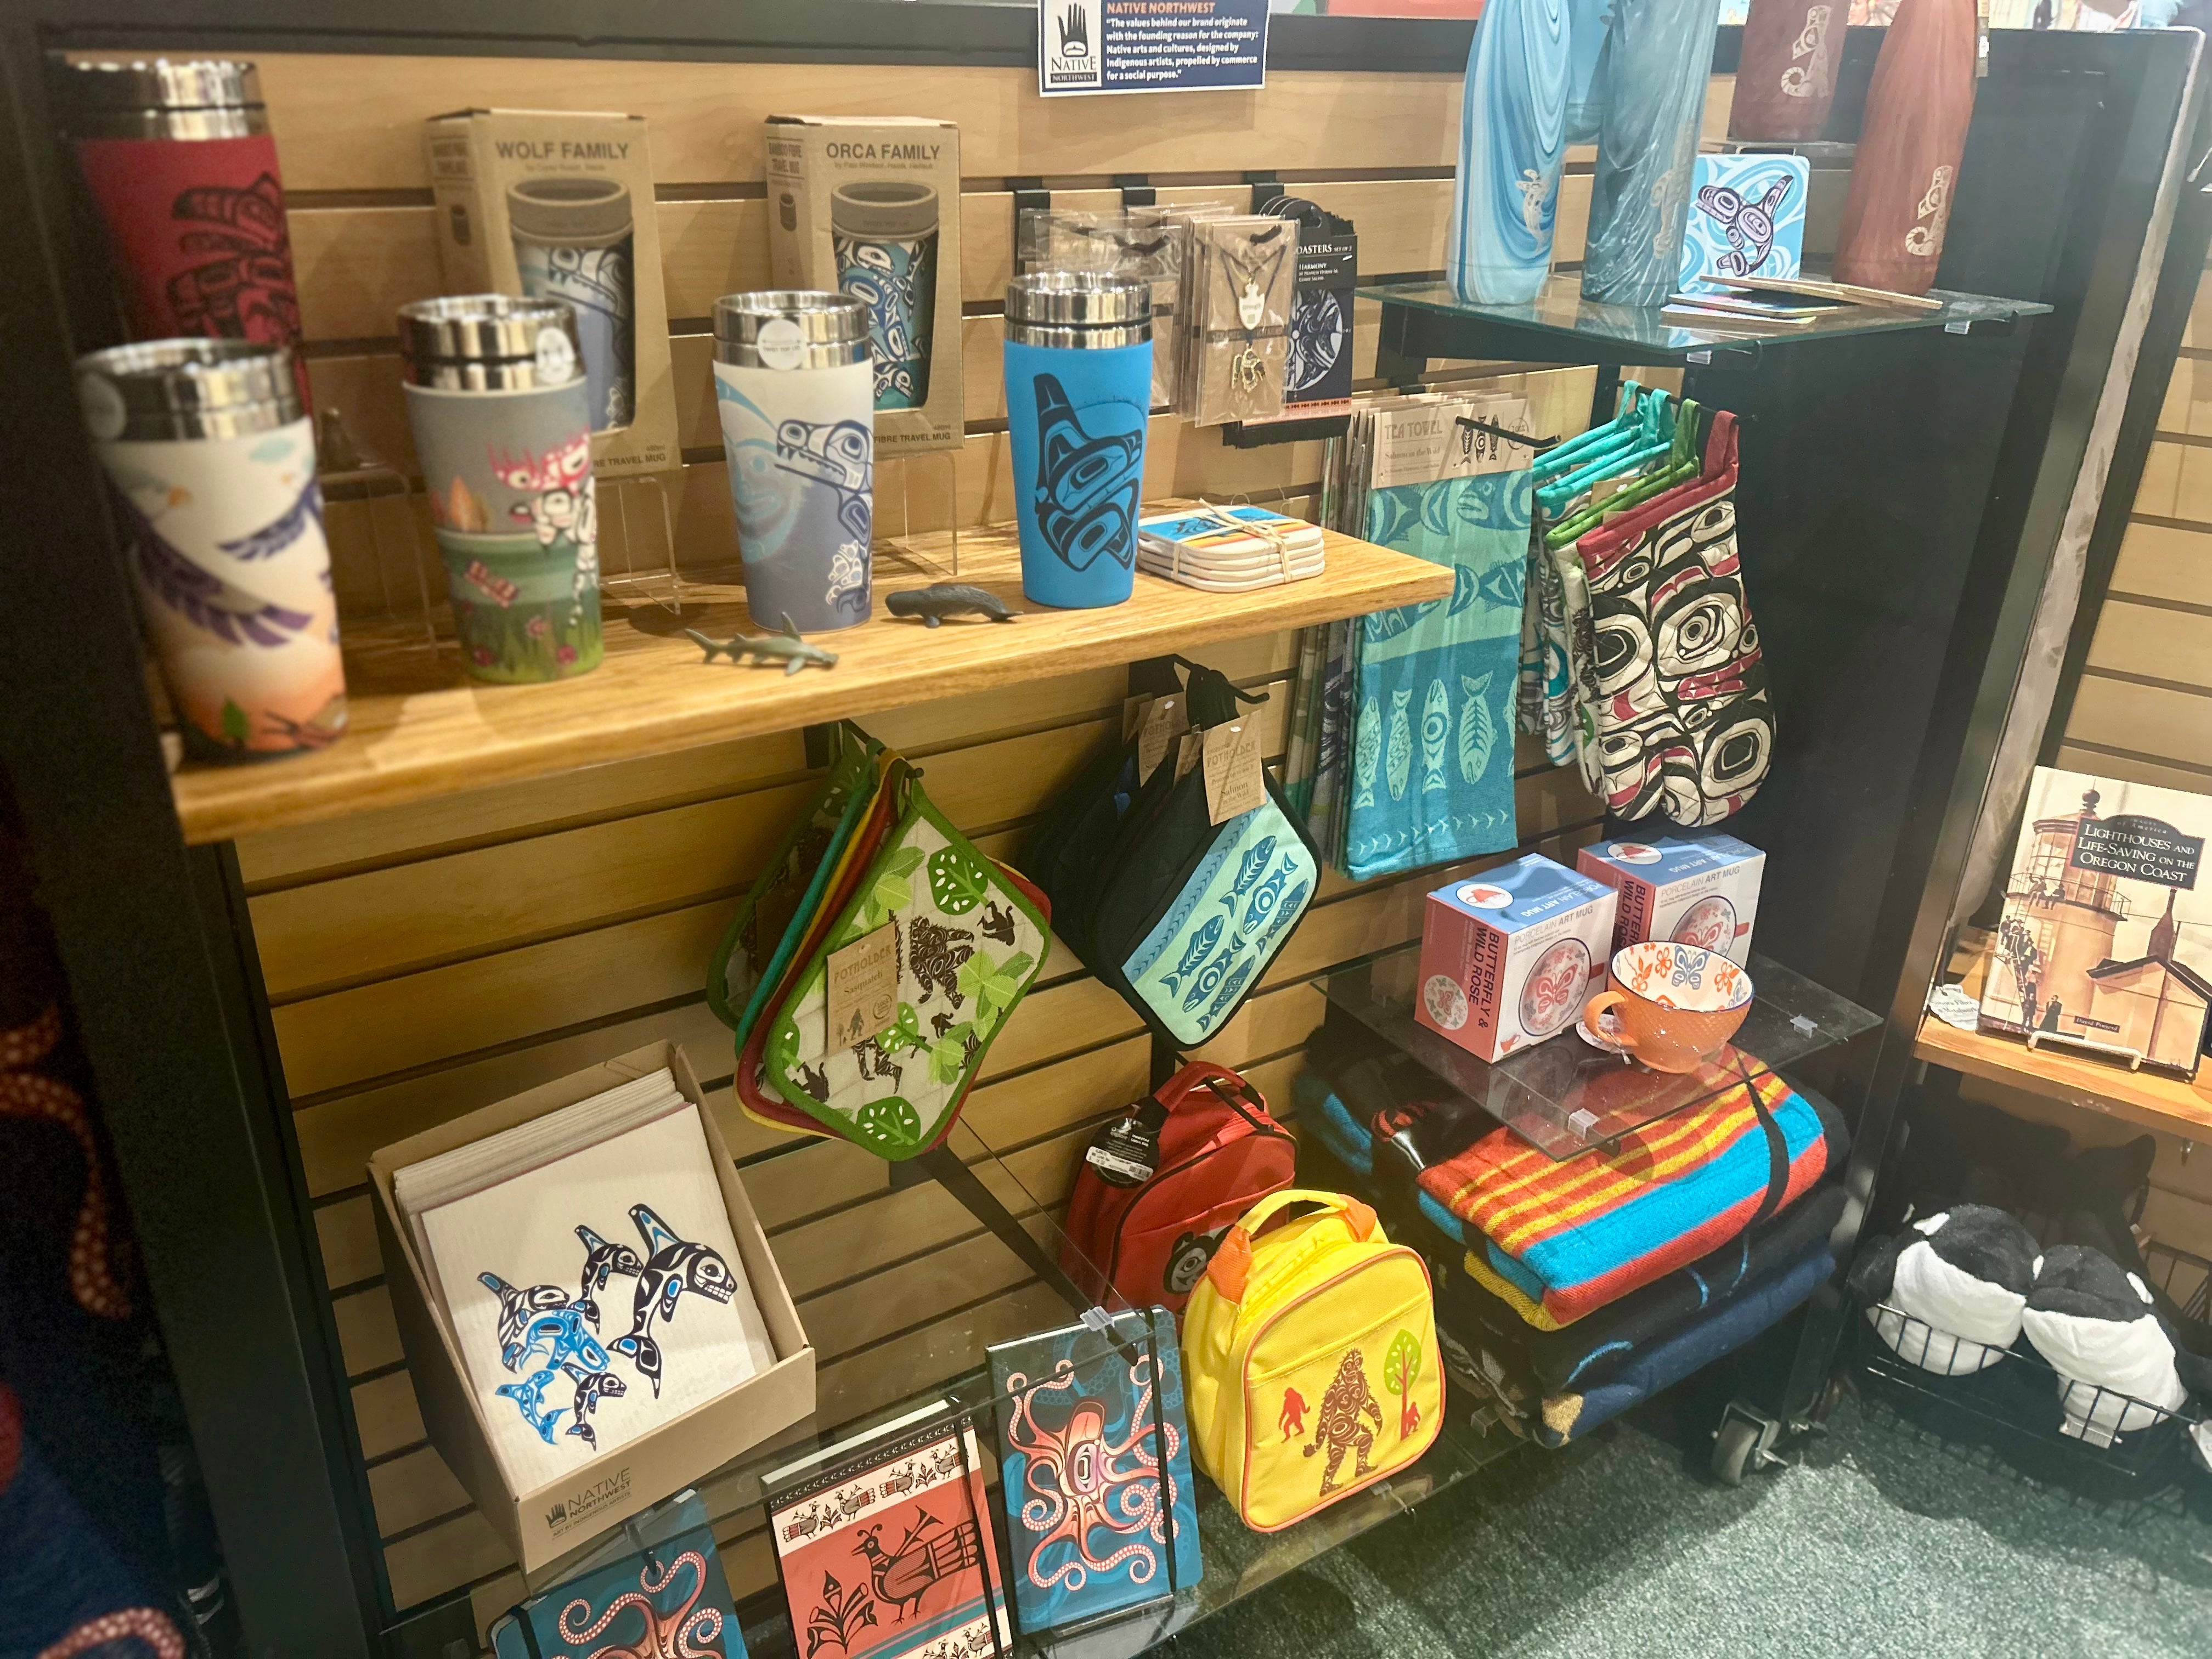 Coasters, a travel mug, a backpack, and a tea towel, all with Pacific Northwest Native motifs. The travel mug features a moose and the backpack features Bigfoot.